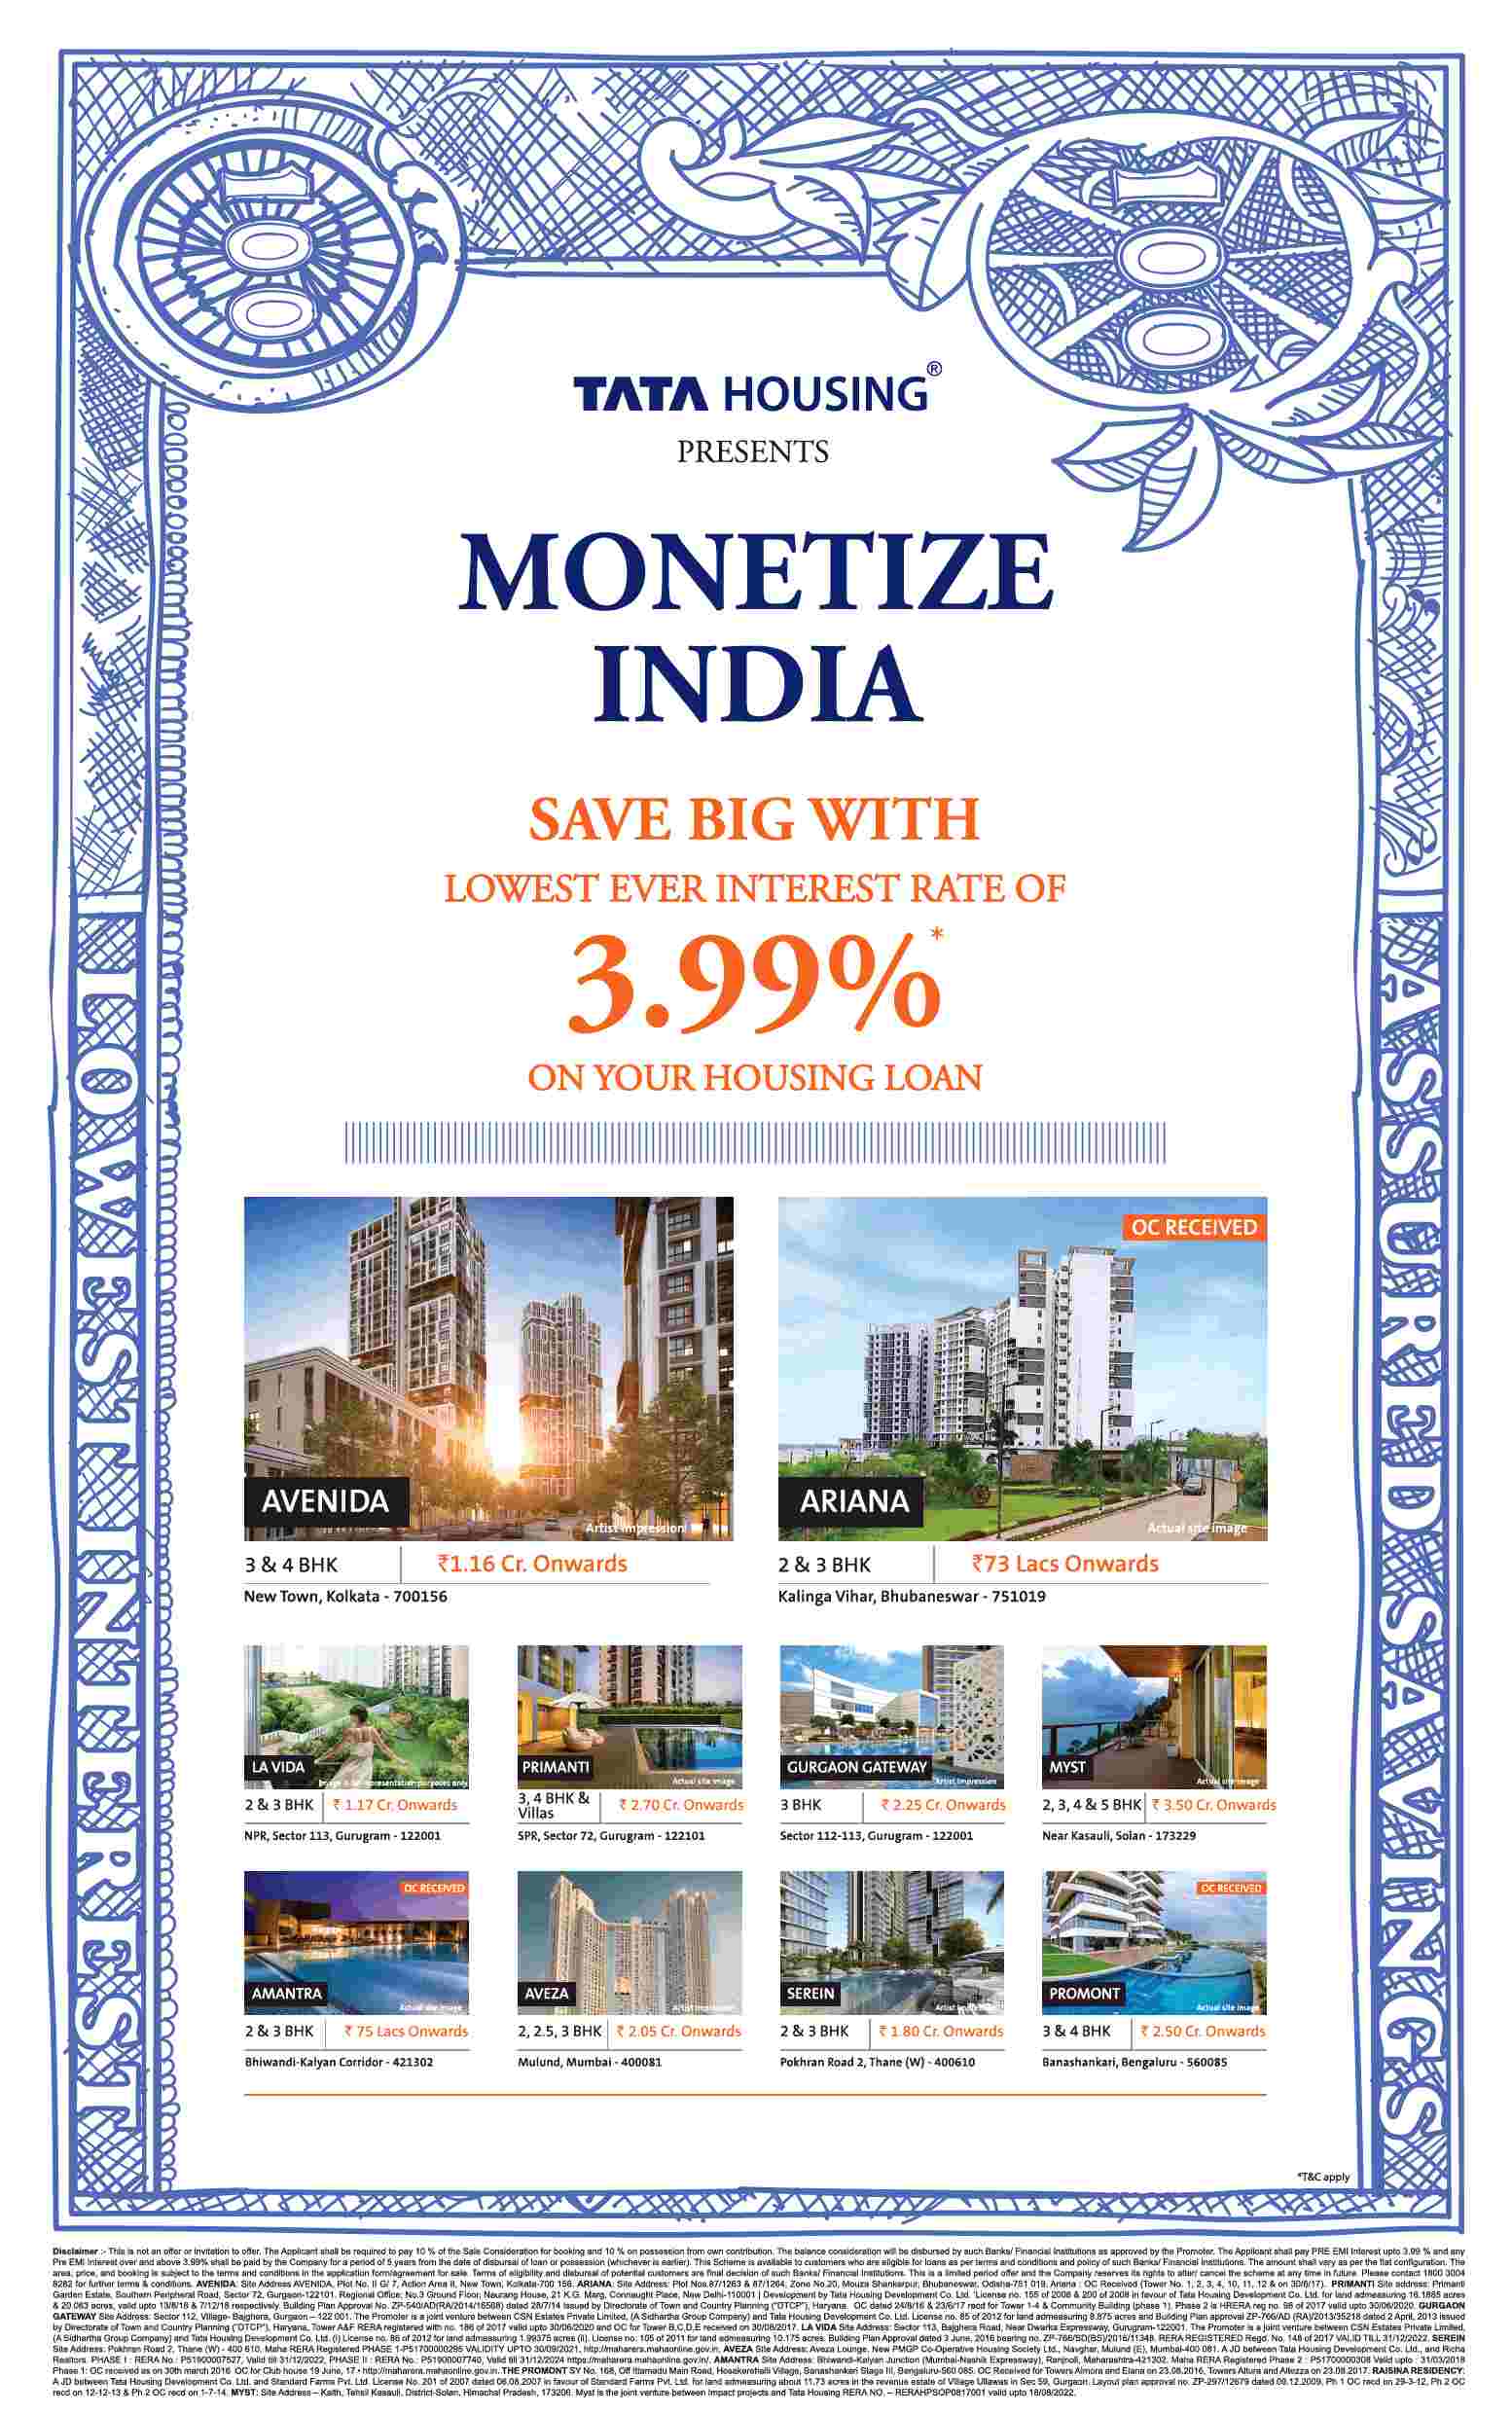 Tata Housing presents Monetize India with the lowest interest rate of 3.99% on your housing loan Update